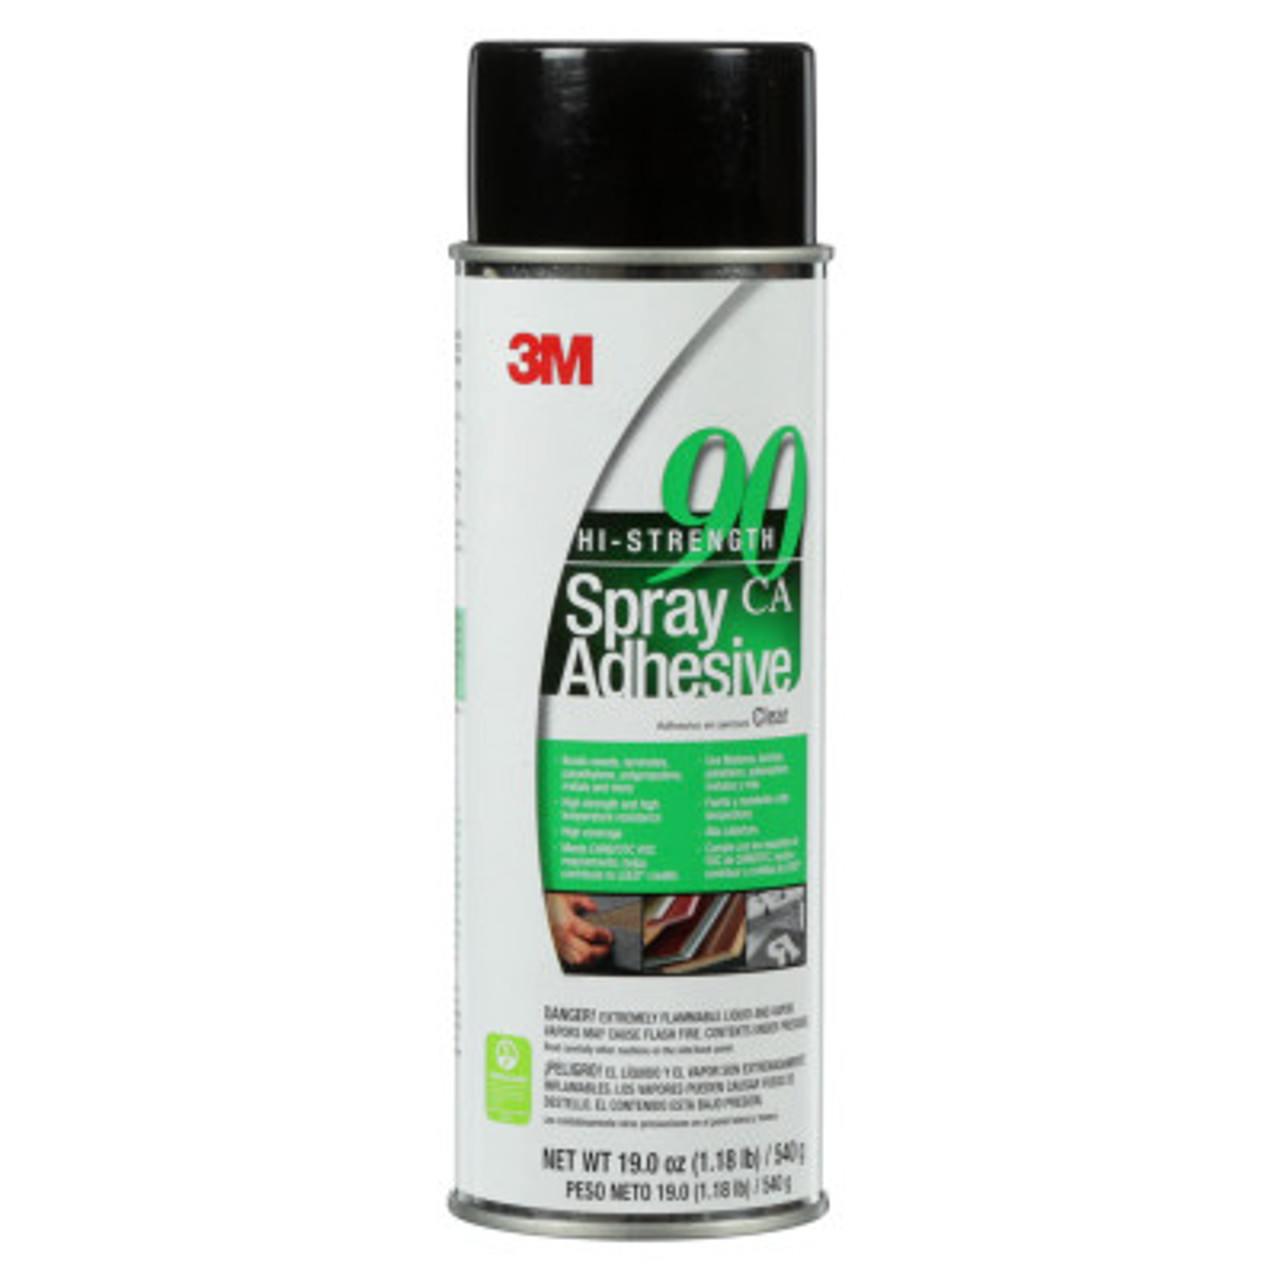 3M High Strength 90 Spray Adhesive 17.6 Oz for sale online